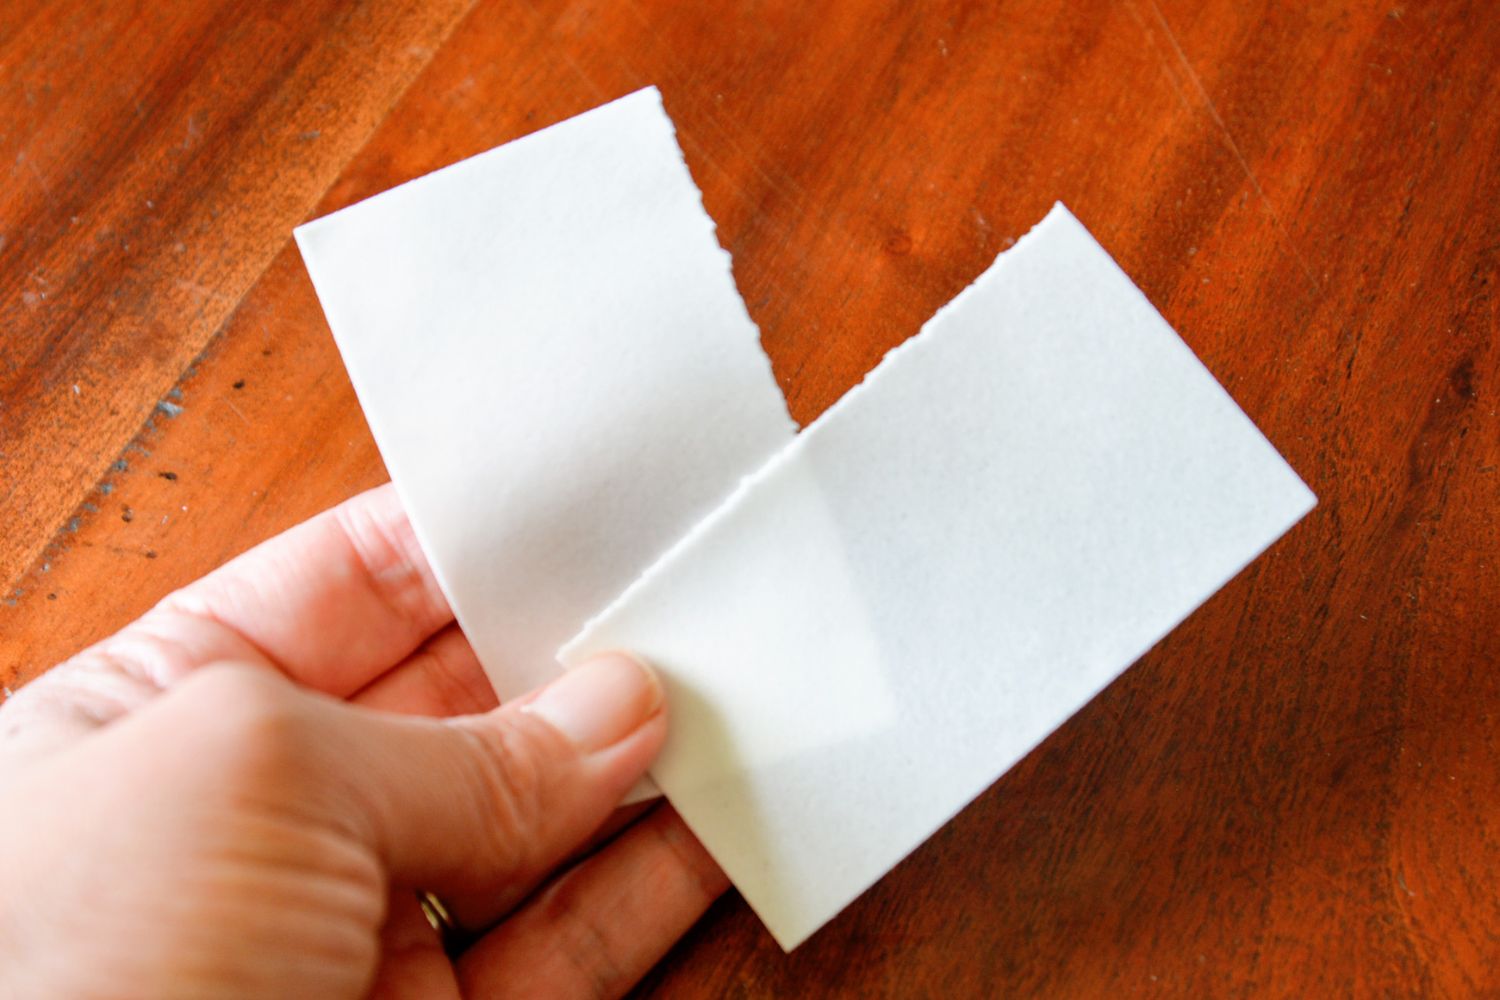 A person holding two small strips of True Earth laundry detergent strips before using them in testing.